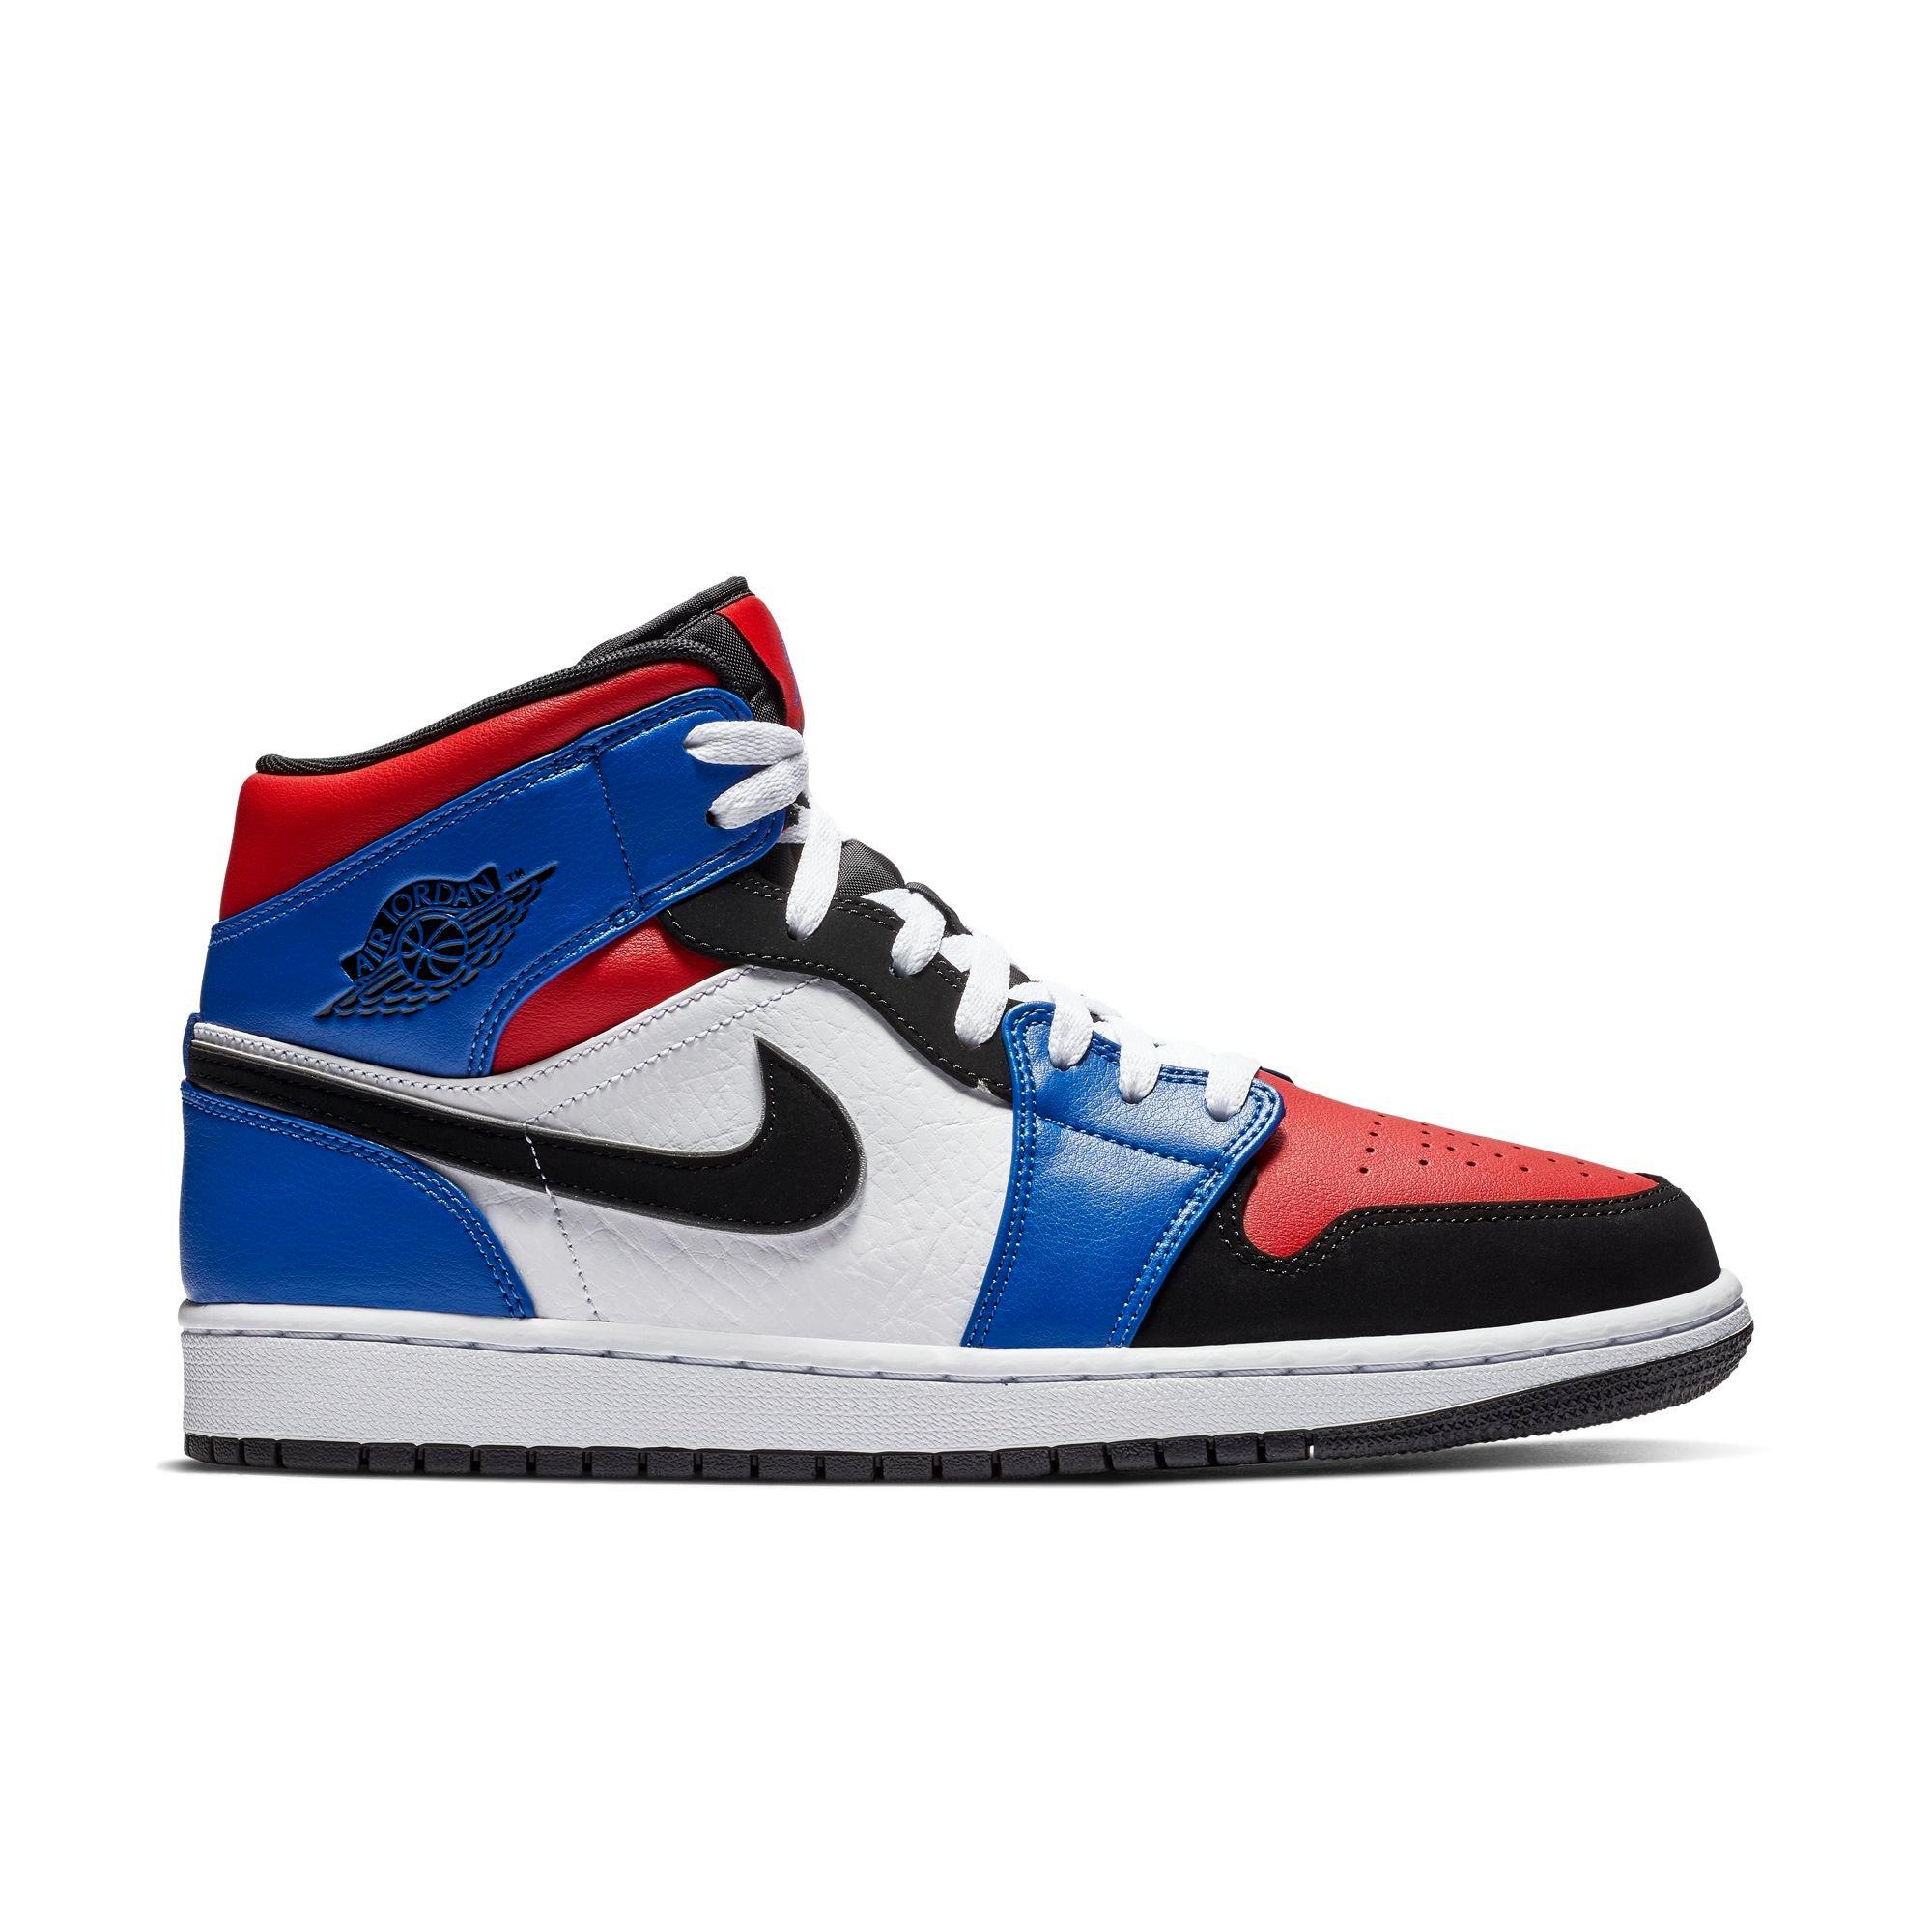 jordan 1s blue red and white